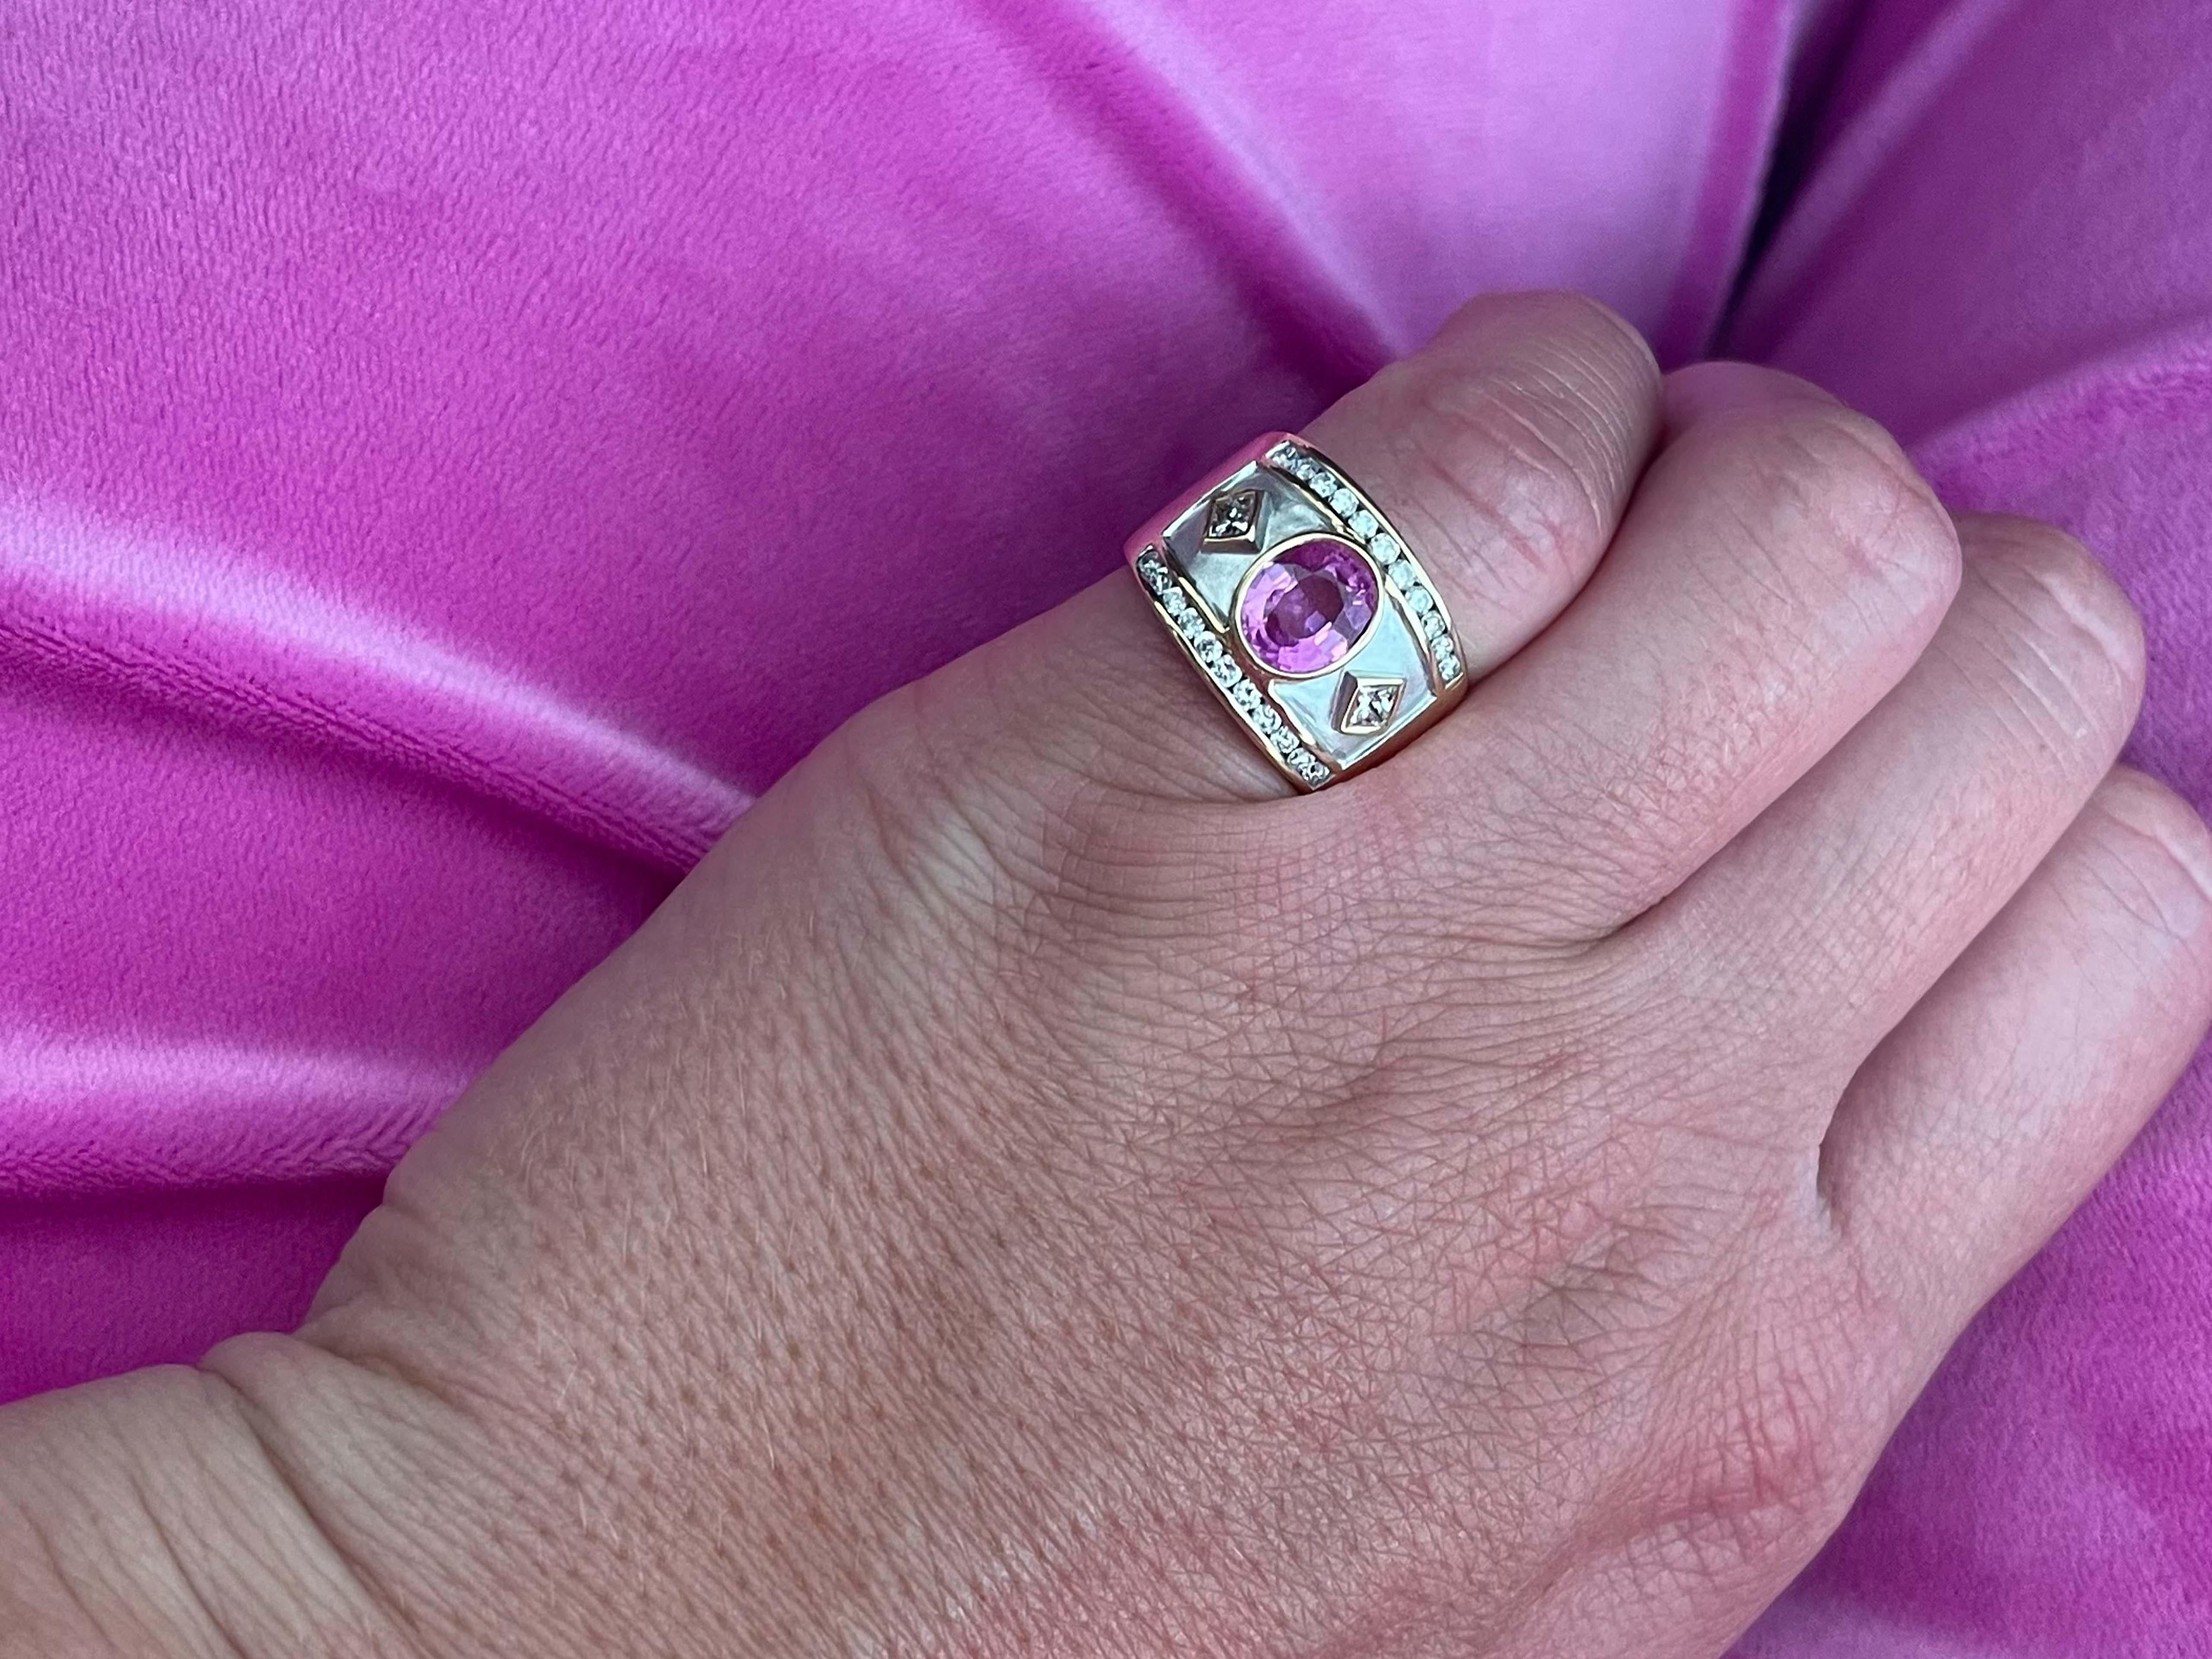 This gorgeous ring features an oval bezel set pink tourmaline 1.28 carats. Beside the tourmaline are 2 princess cut diamonds one on each side totaling 0.20 carats. The top and bottom of the ring have a row of diamonds totaling 0.22 carats. All the